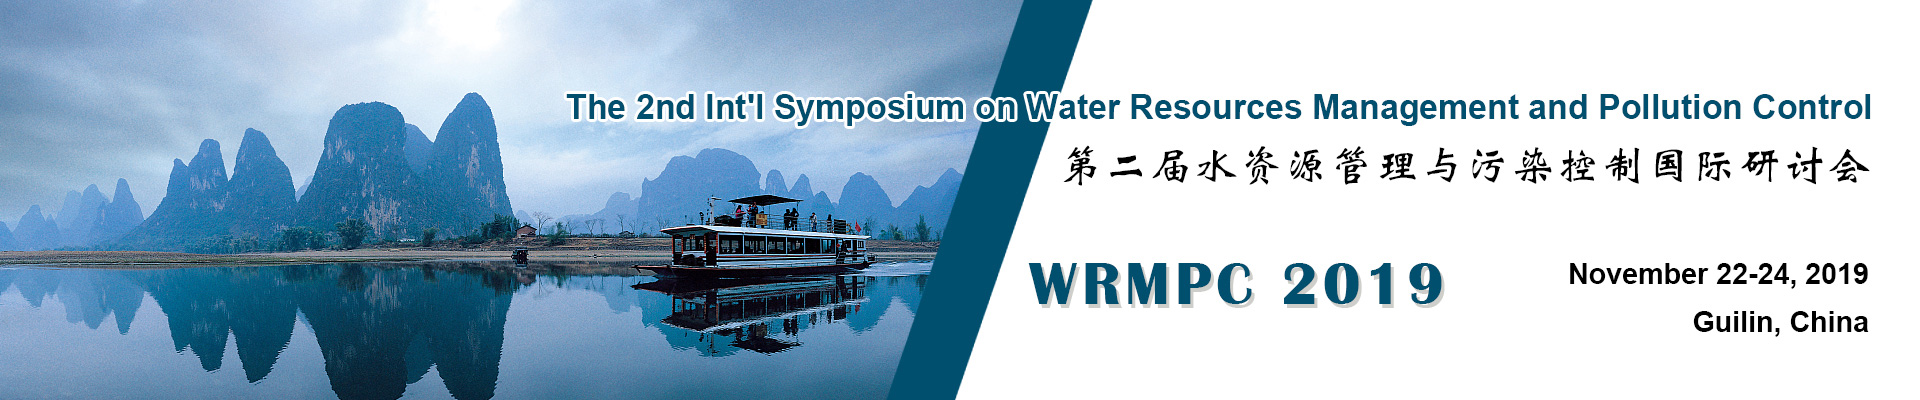 The 2nd Int'l Symposium on Water Resources Management and Pollution Control (WRMPC 2019), Guilin, Guangxi, China